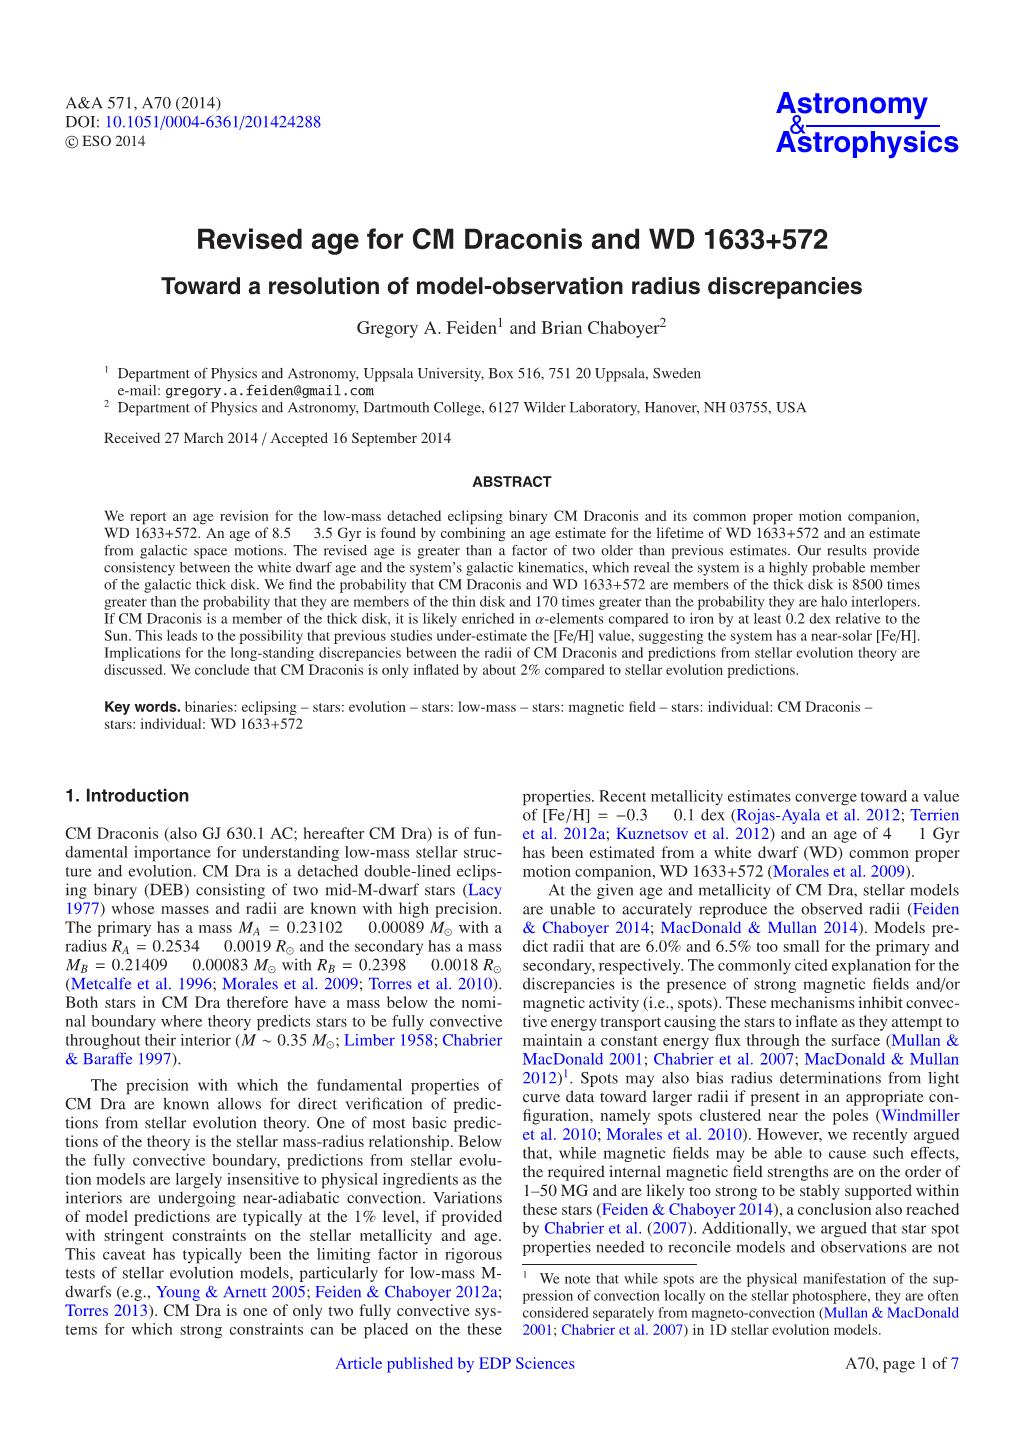 Revised Age for CM Draconis and WD 1633+572 Toward a Resolution of Model-Observation Radius Discrepancies